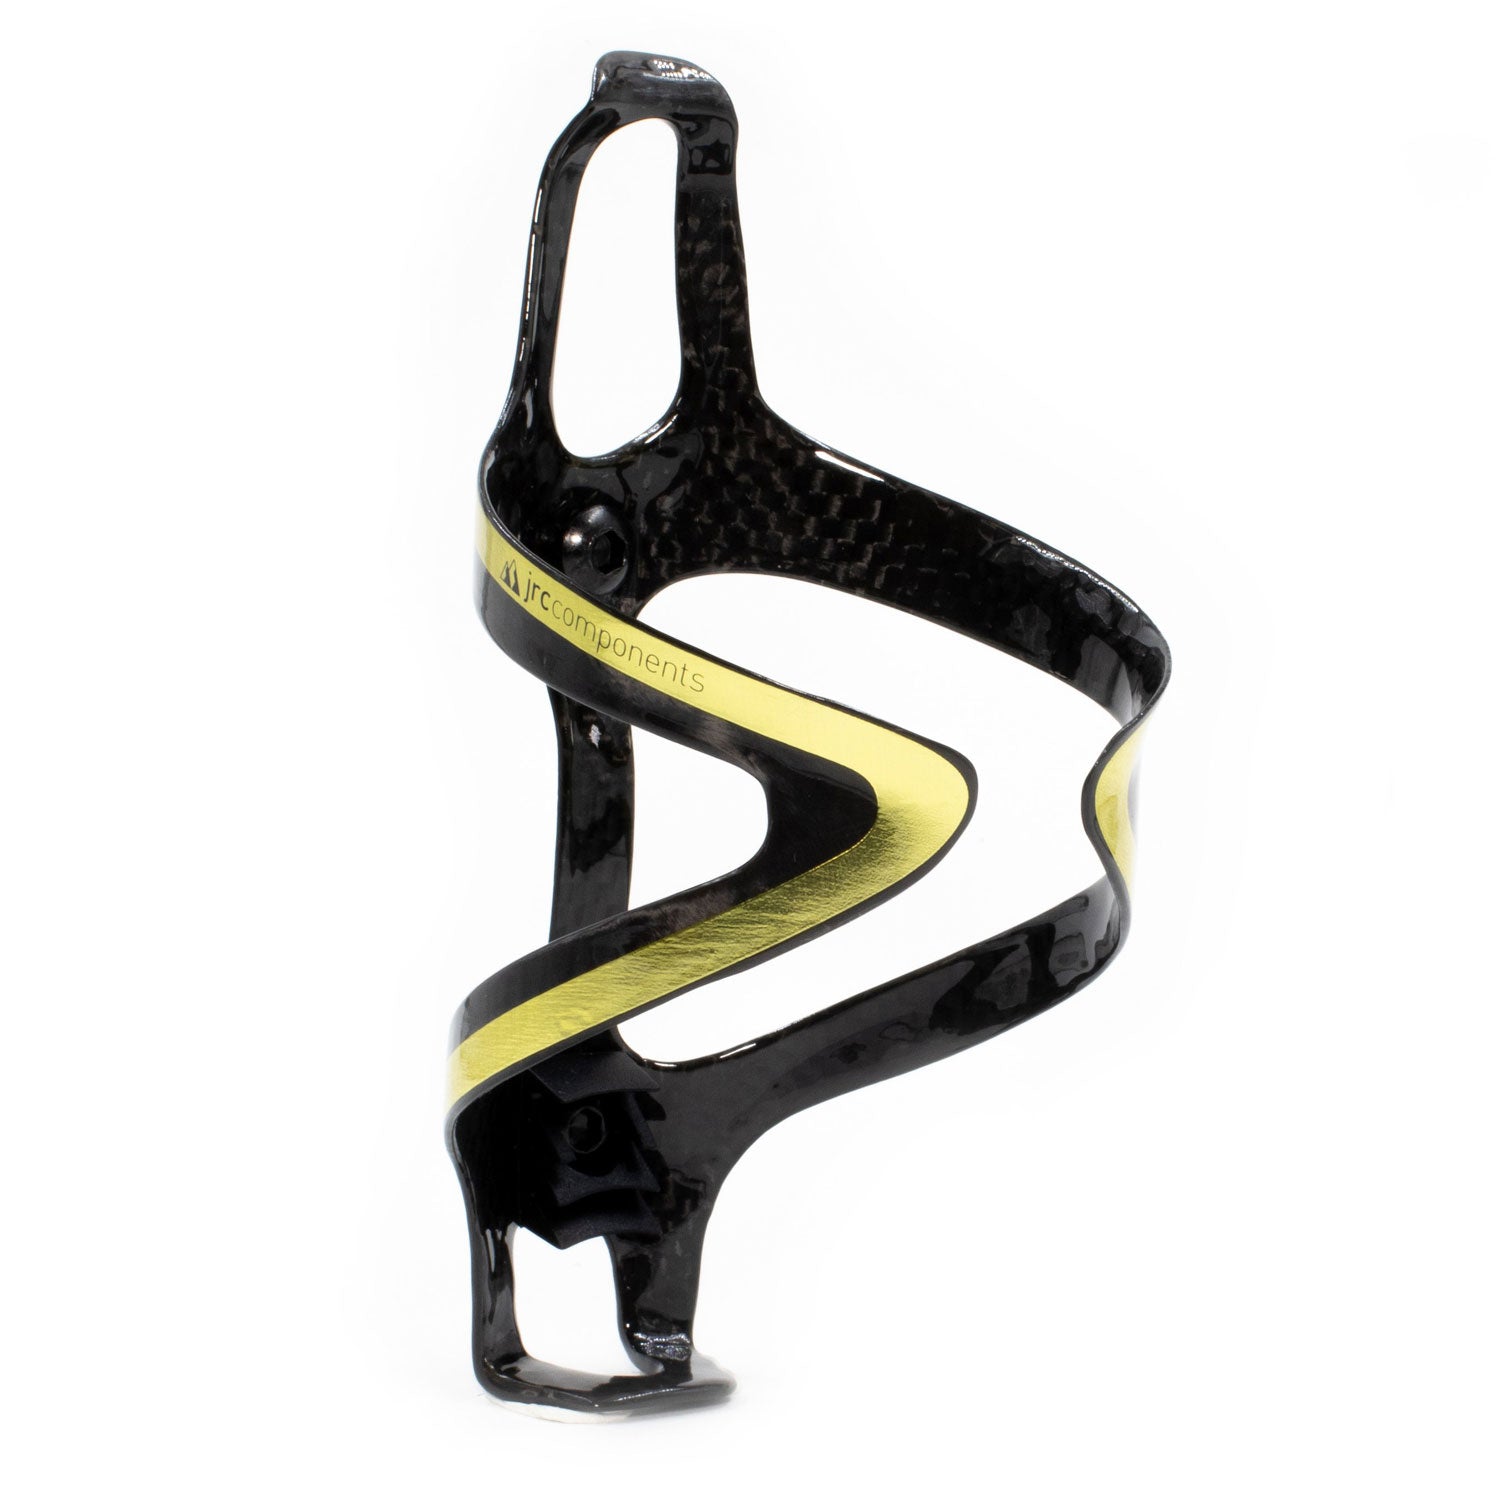 Gold, super lightweight carbon fibre bottle cages with a sleek gloss finish